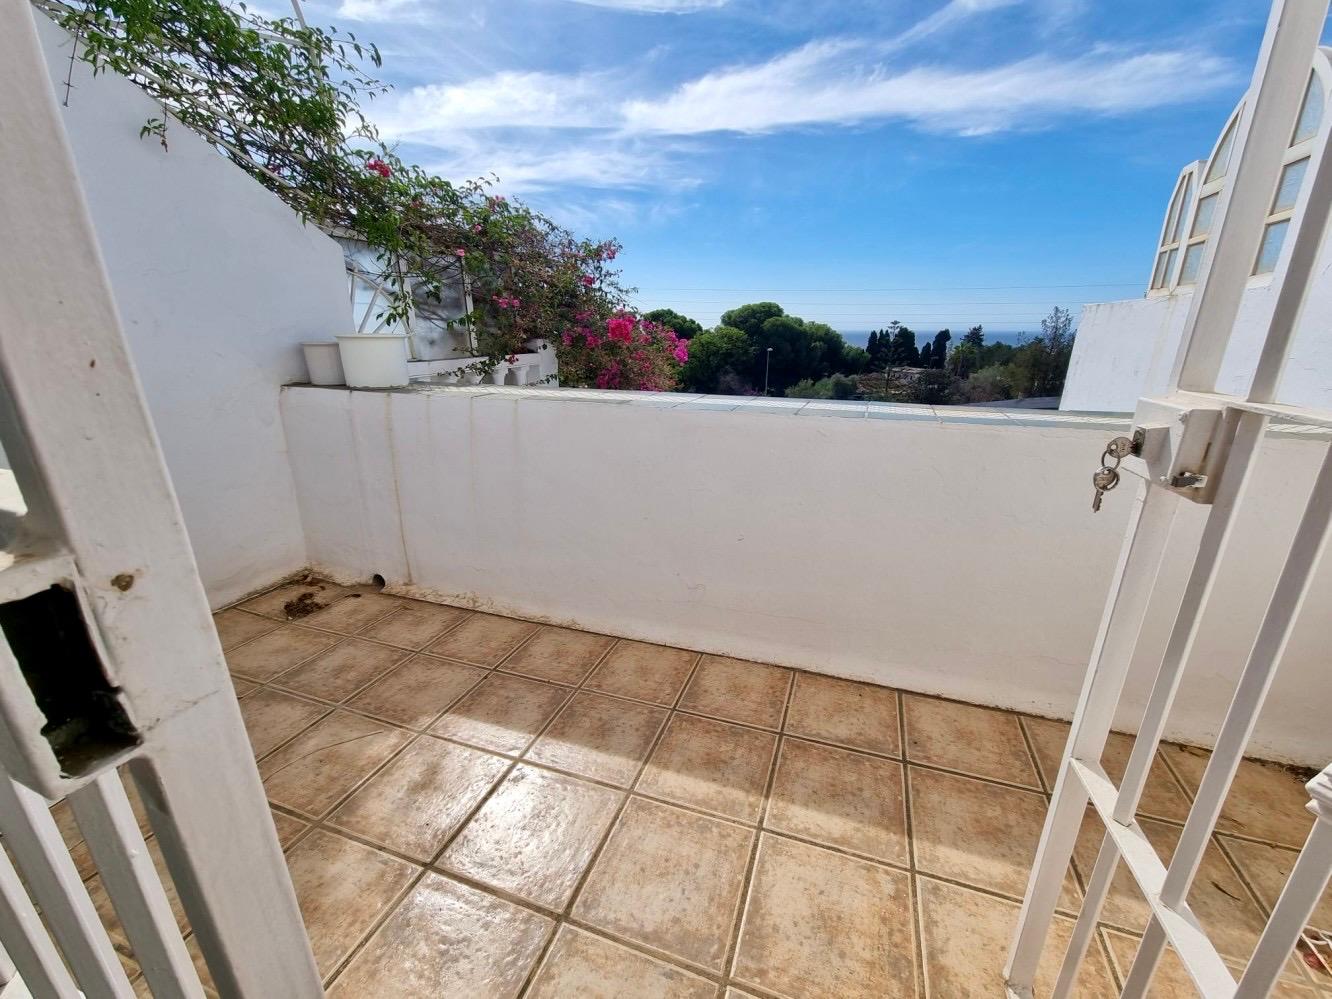 2 BEDROOM TOWNHOUSE WITH 3 TERRACES, GARDEN AND COMMUNITY POOL - NERJA, CAPISTRANO